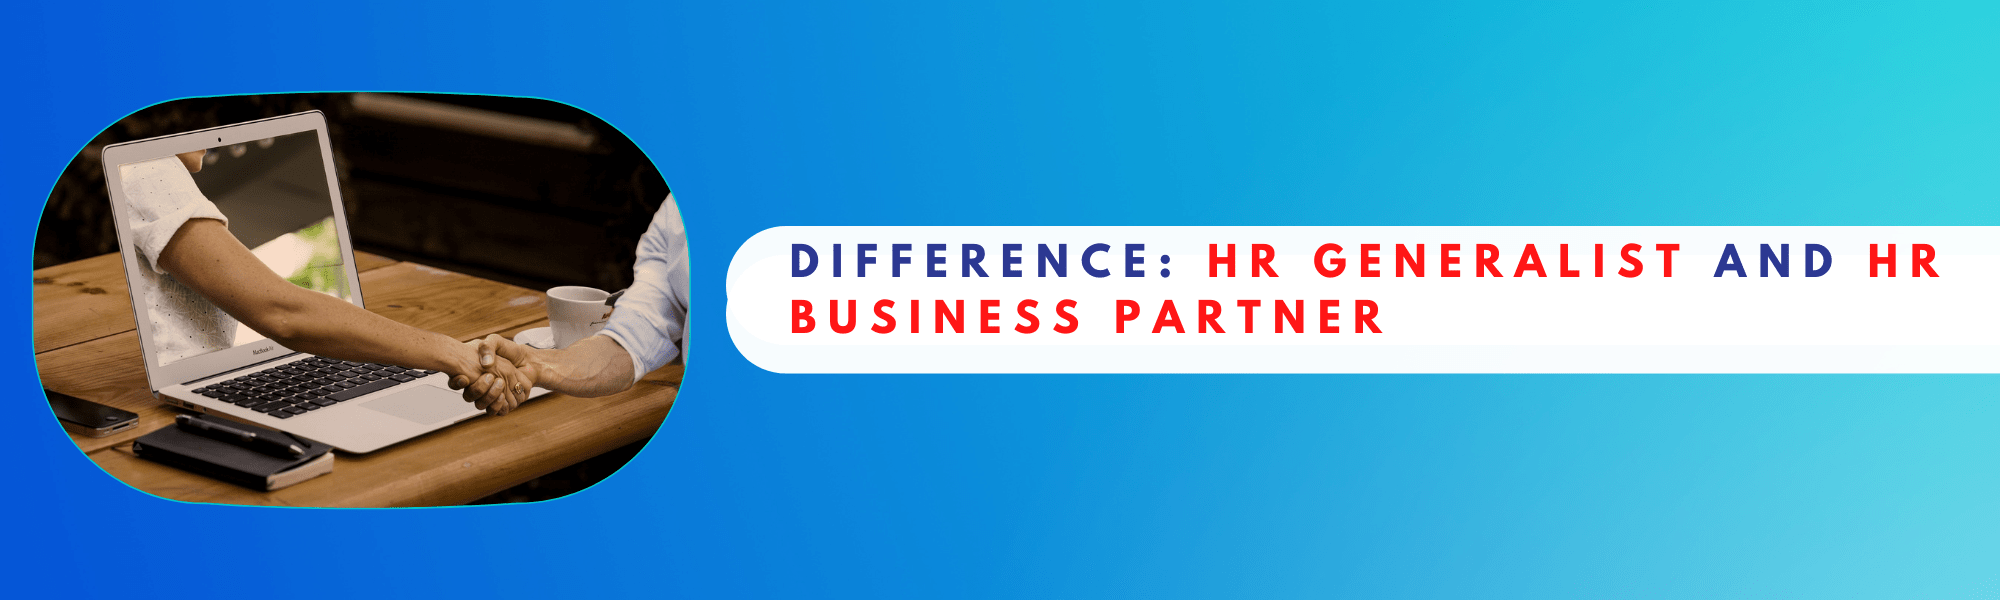 Difference HR Generalist And HR Business Partner